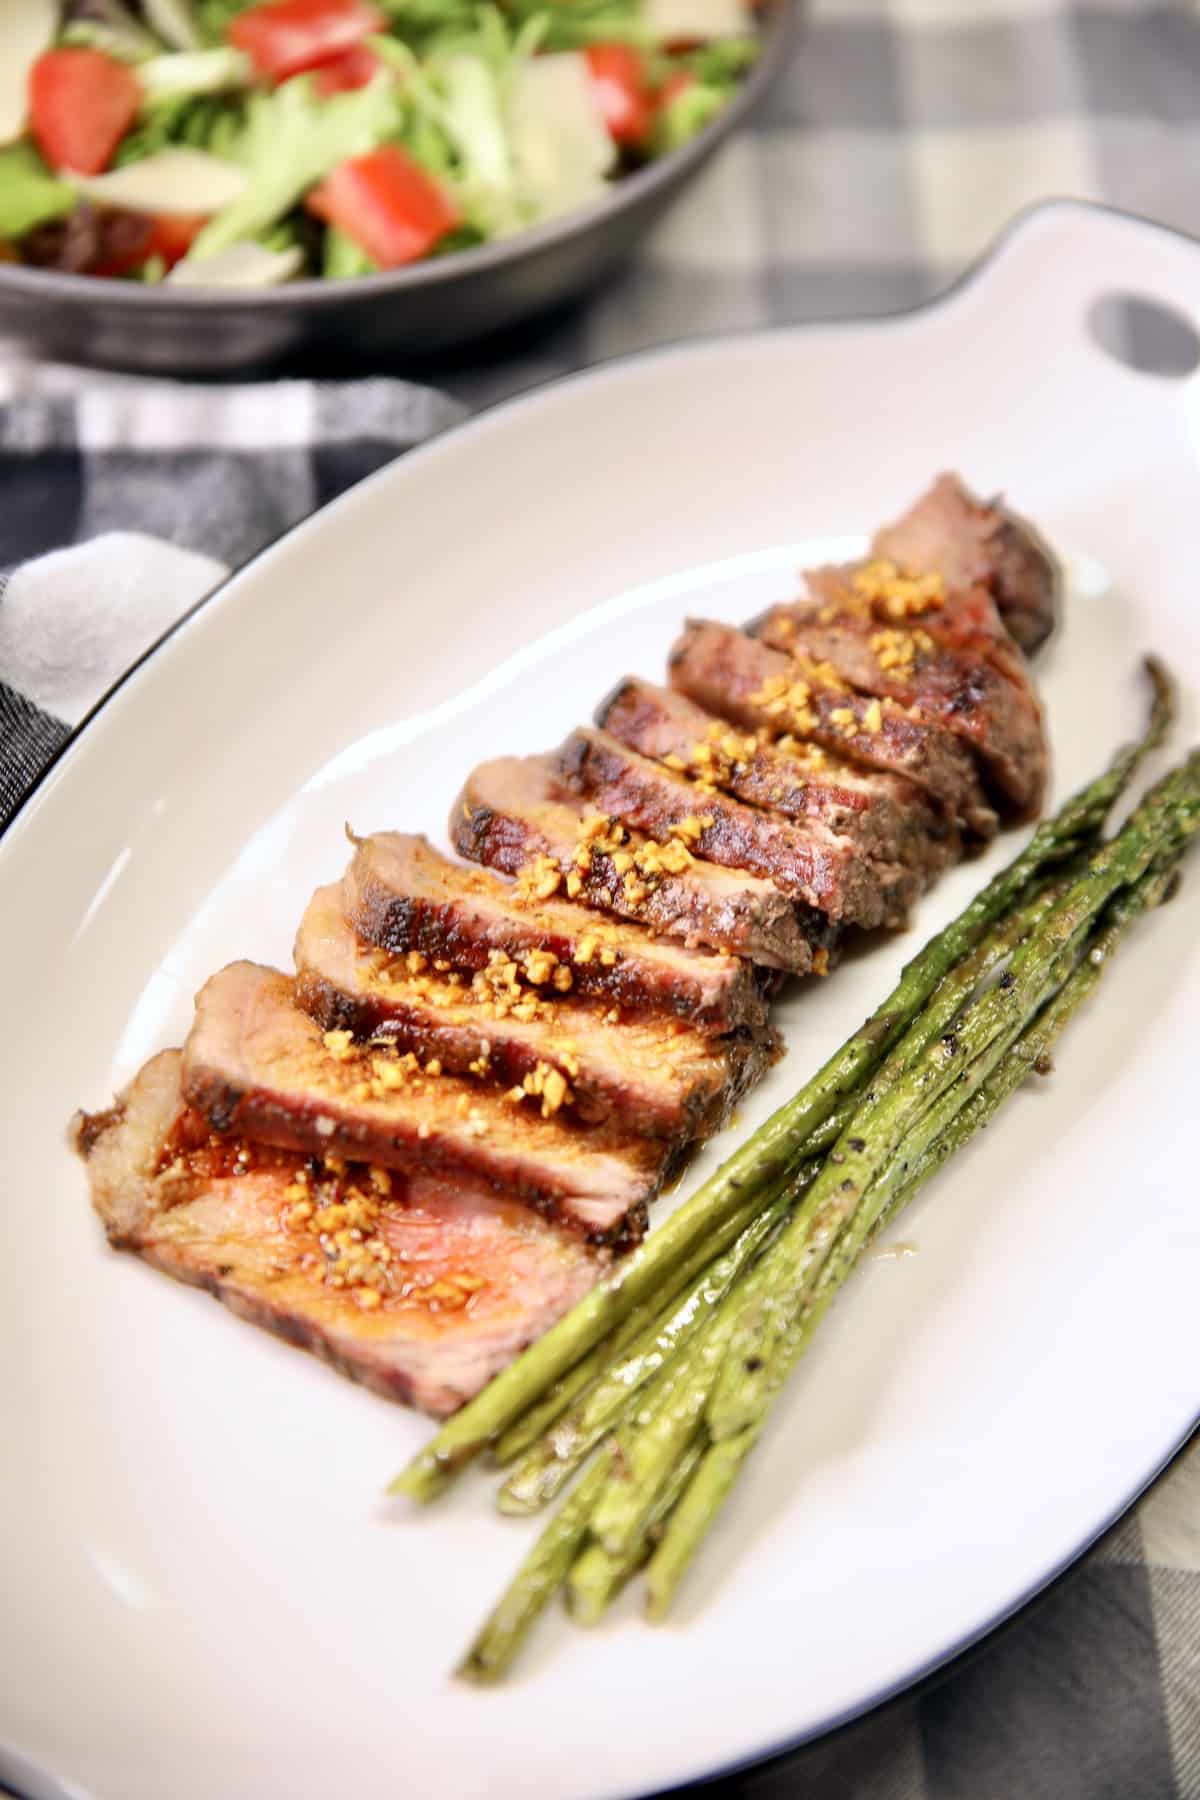 Plate with sliced strip steak and asparagus.